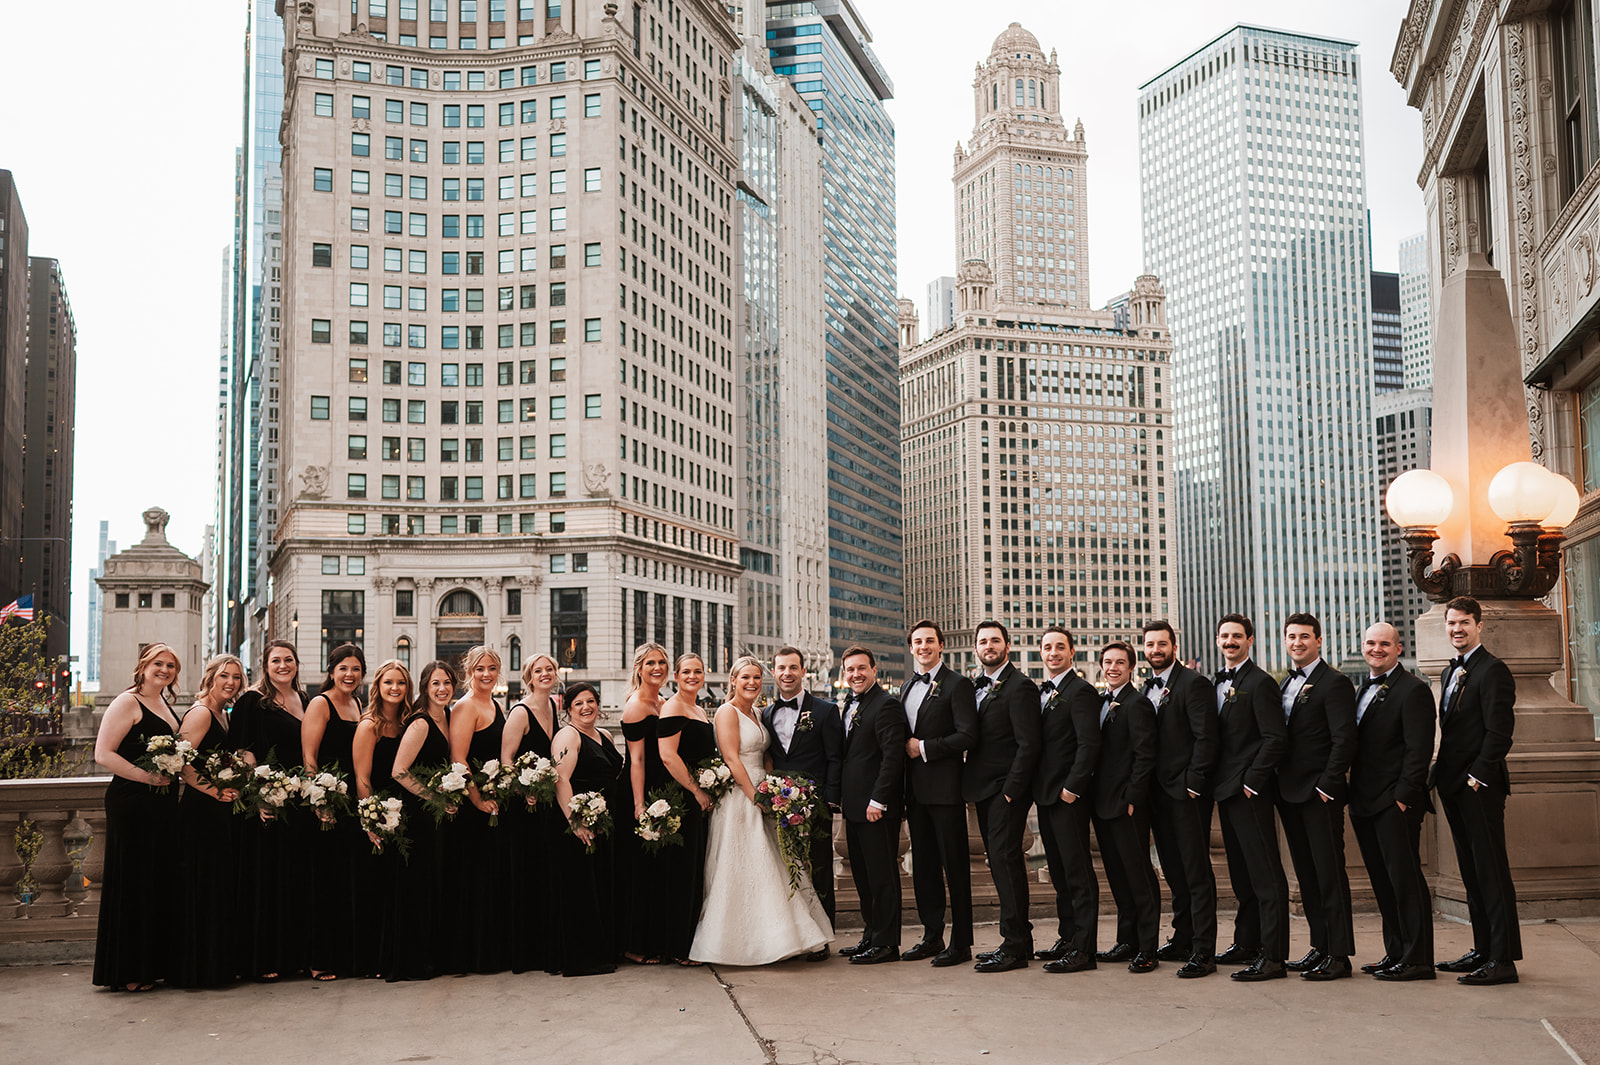 wedding party at the end of the winter on riverwalk by the Wrigley building chicago